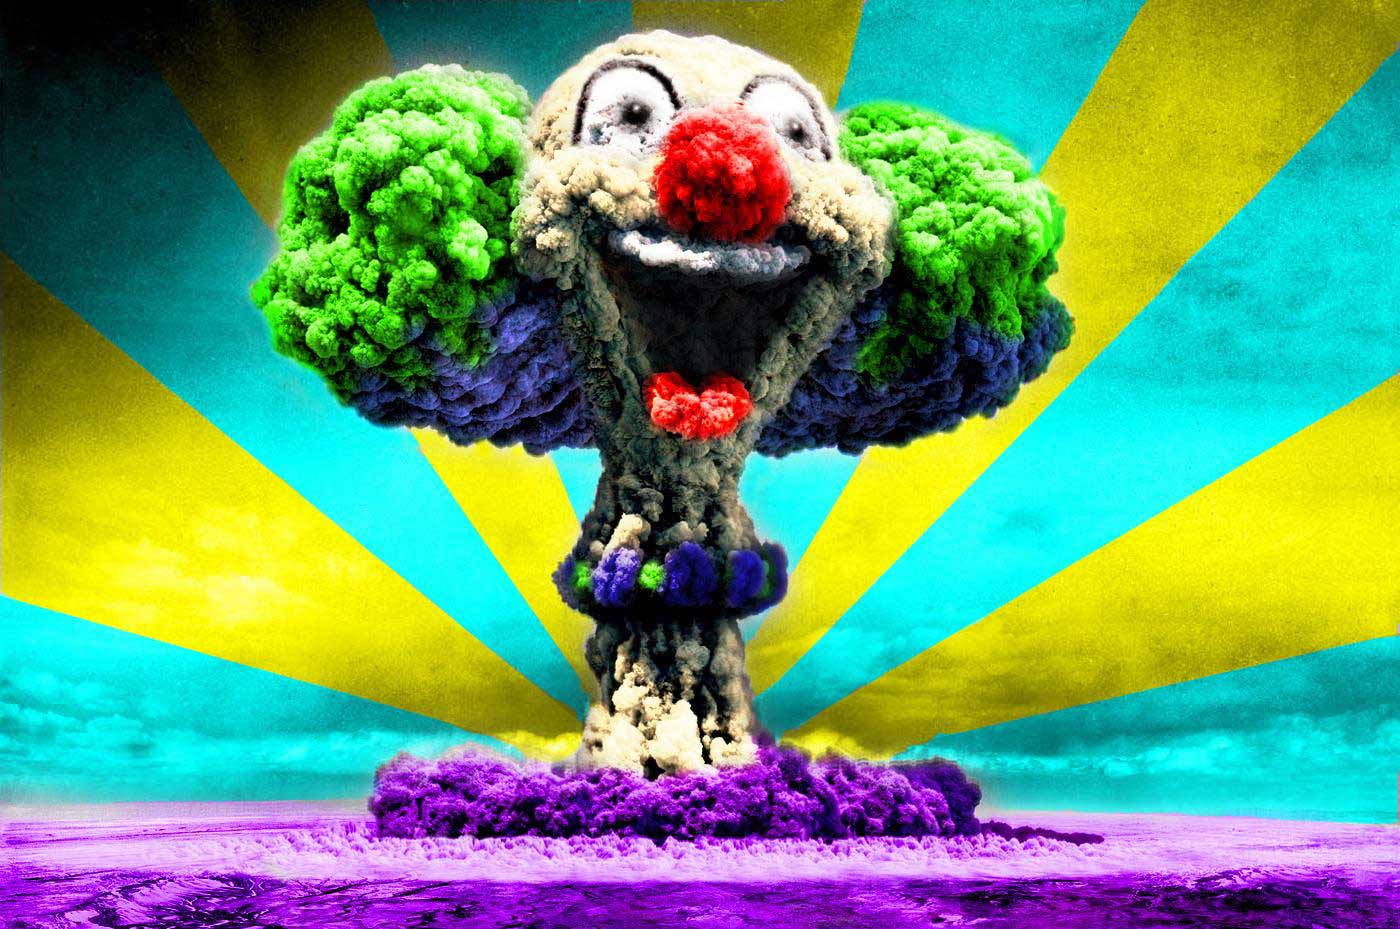 Wallpaper Friday: Nuclear Clown Explosion